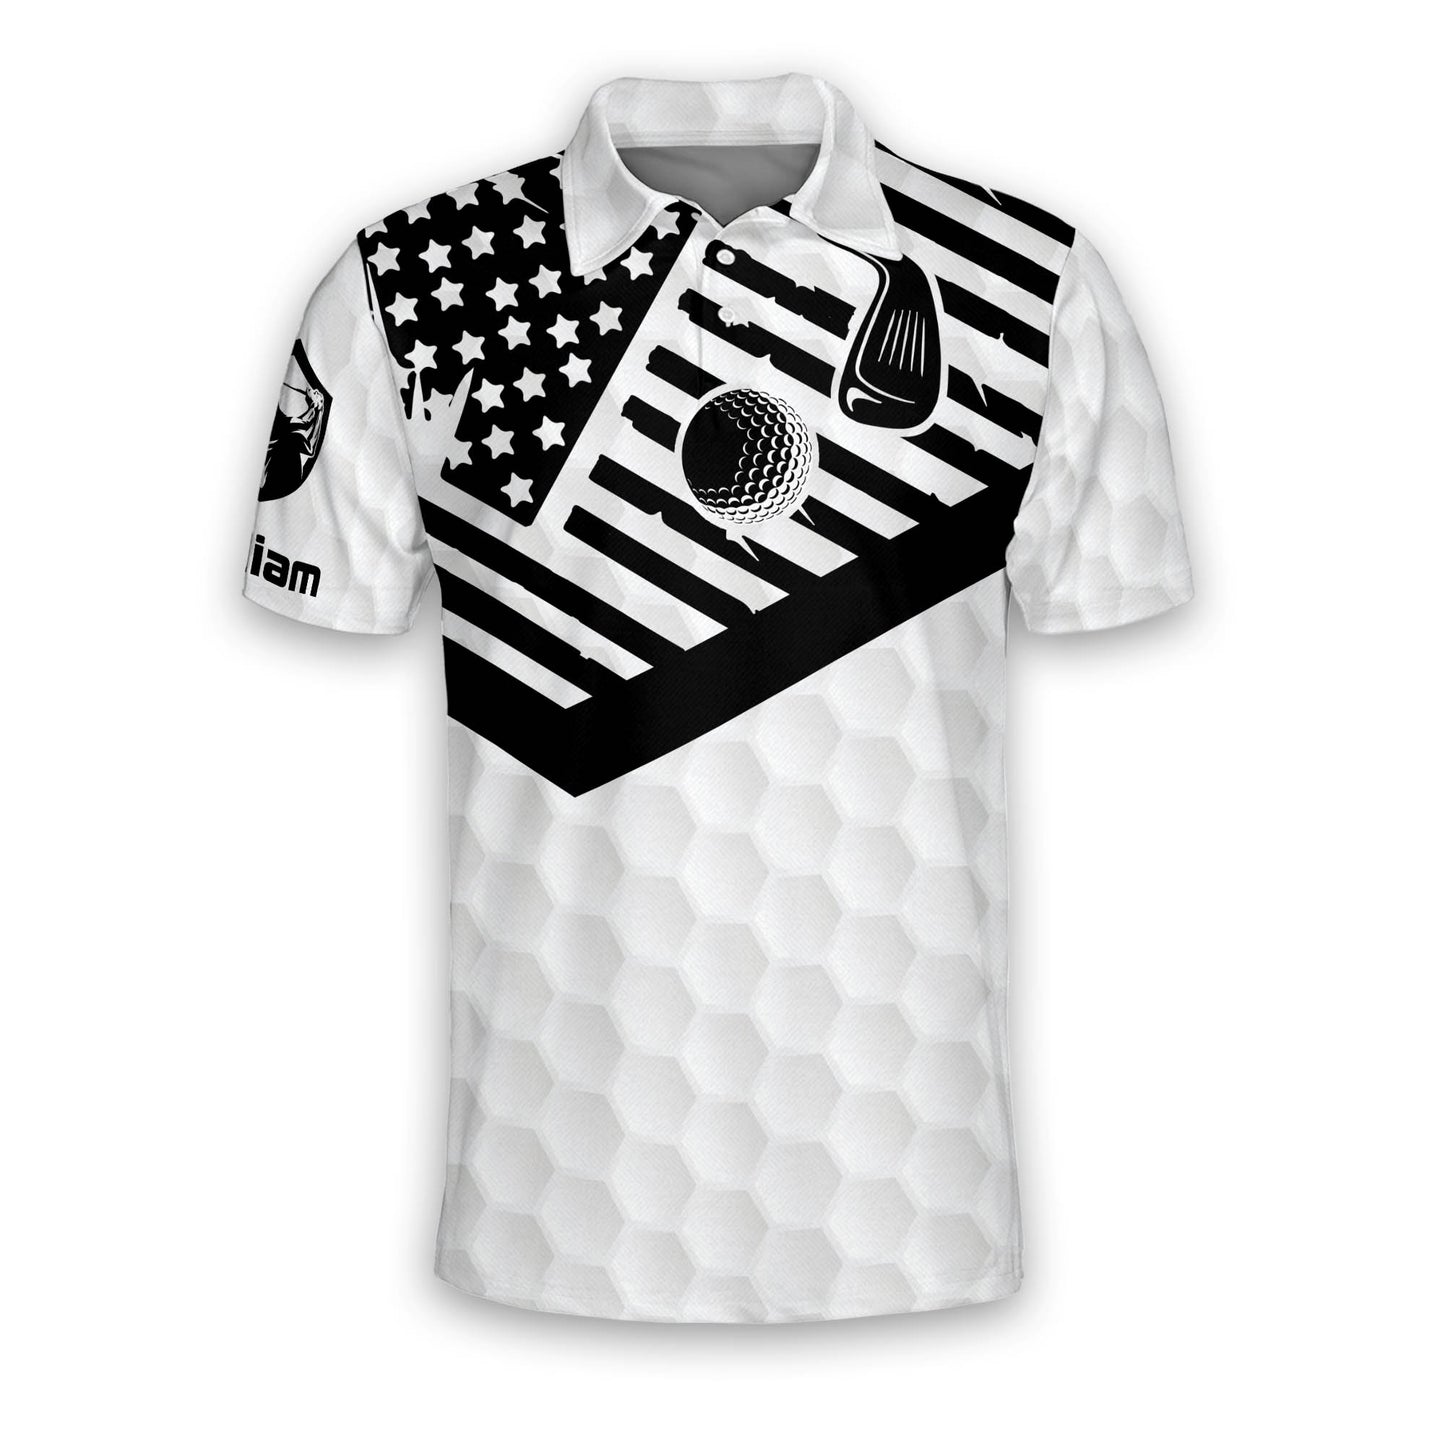 I Put It in Every Hole Golf Polo Shirt GM0023